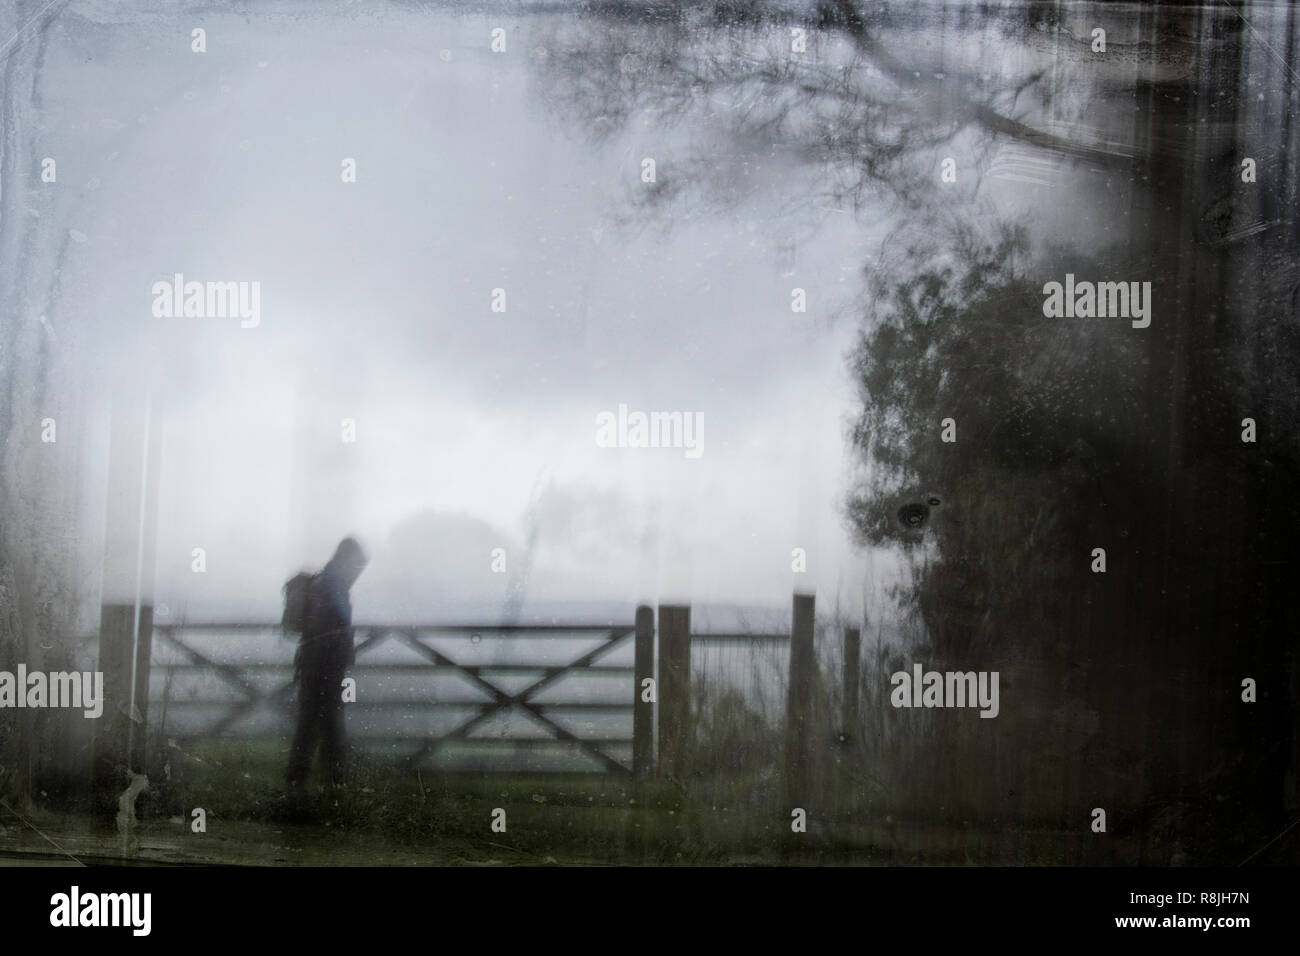 An eerie silhouette of a lone hooded figure with a rucksack by a gate surrounded by trees. With a dark, spooky blurred abstract, grunge effect edit. Stock Photo